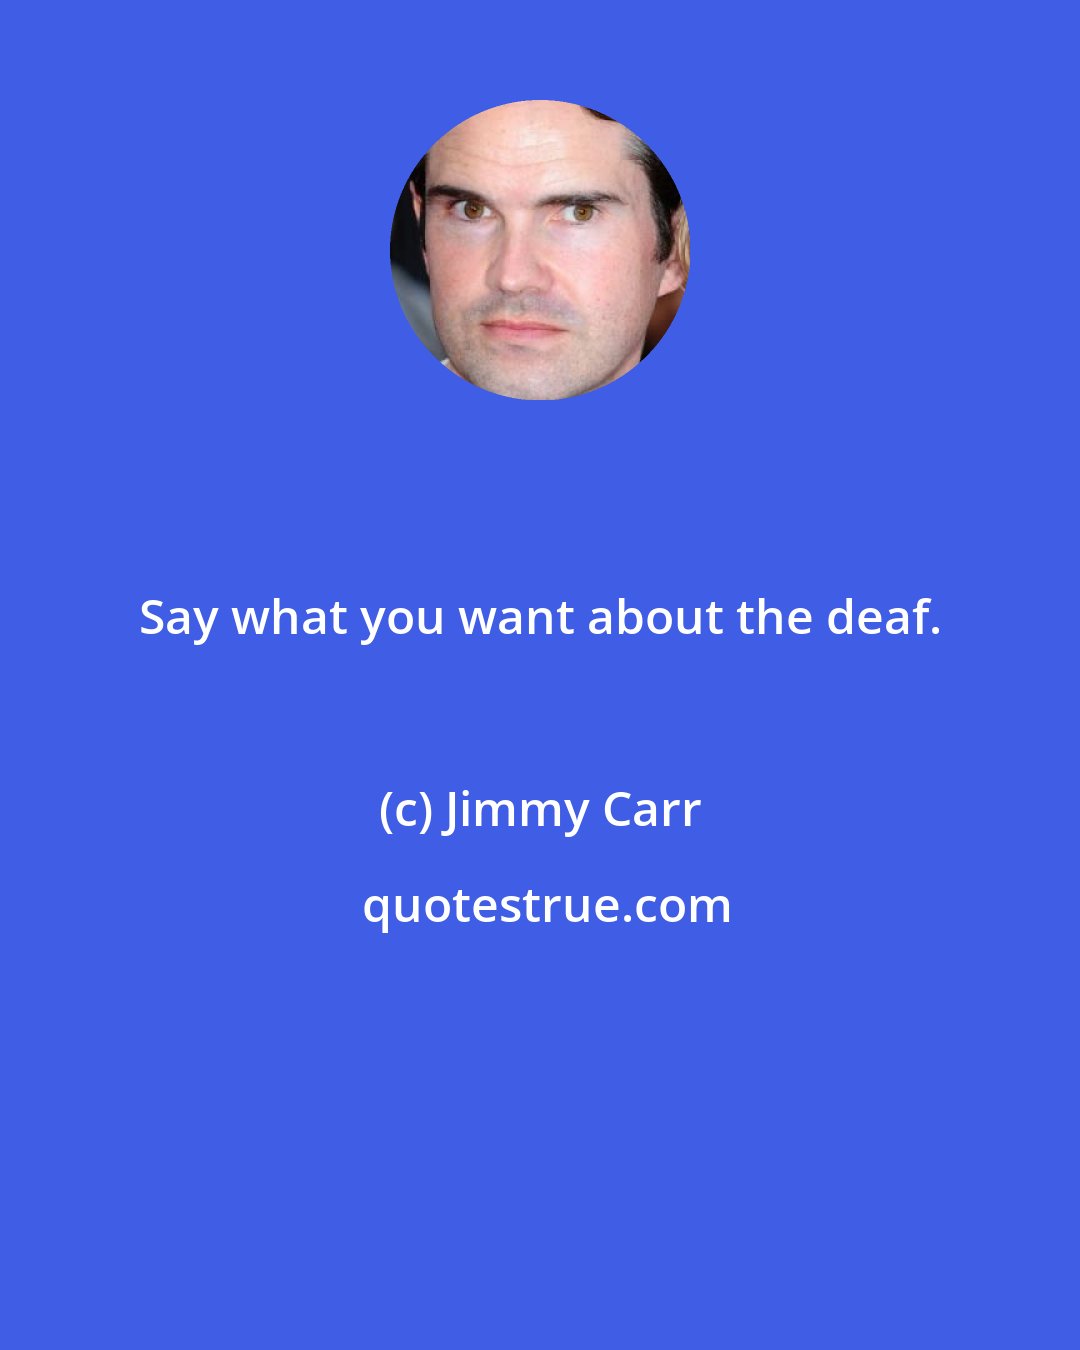 Jimmy Carr: Say what you want about the deaf.